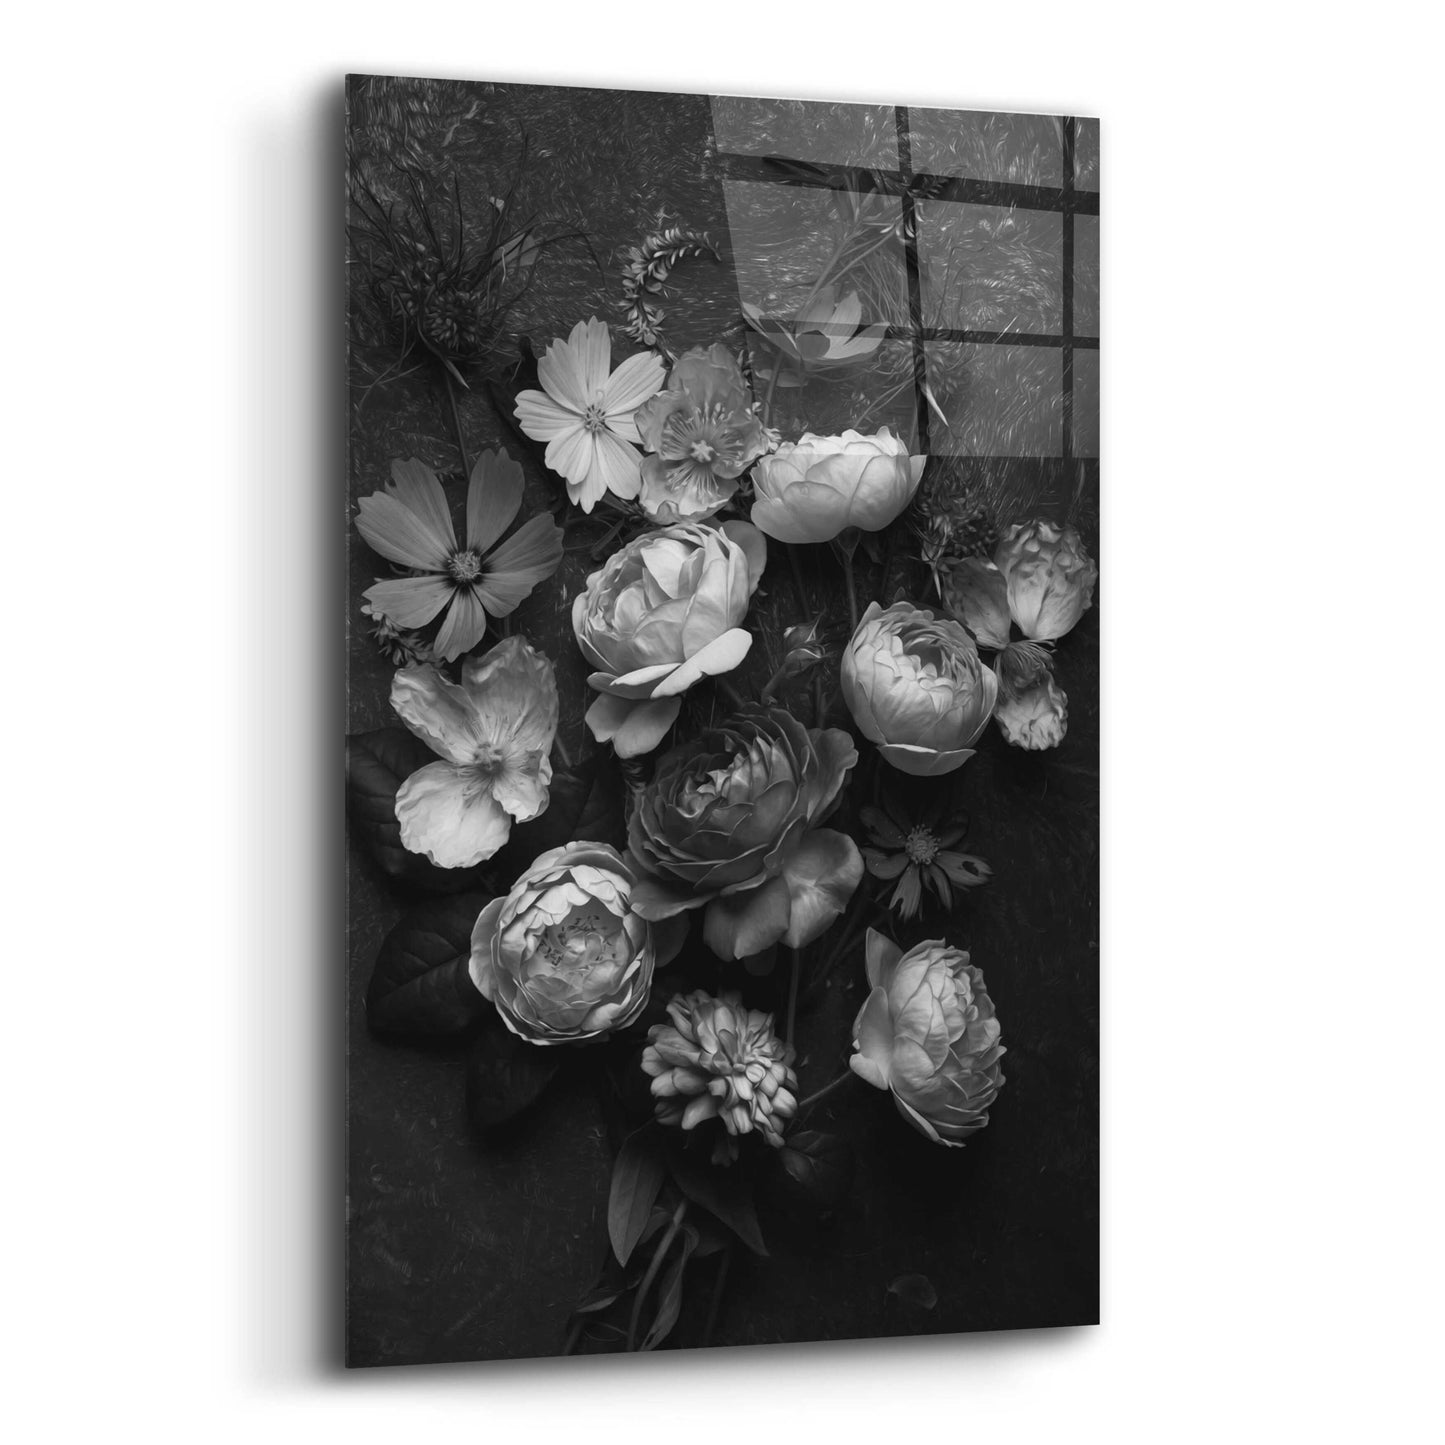 Epic Art 'A Monochrome Pocket Full of Posies' by Leah McLean, Acrylic Glass Wall Art,12x16